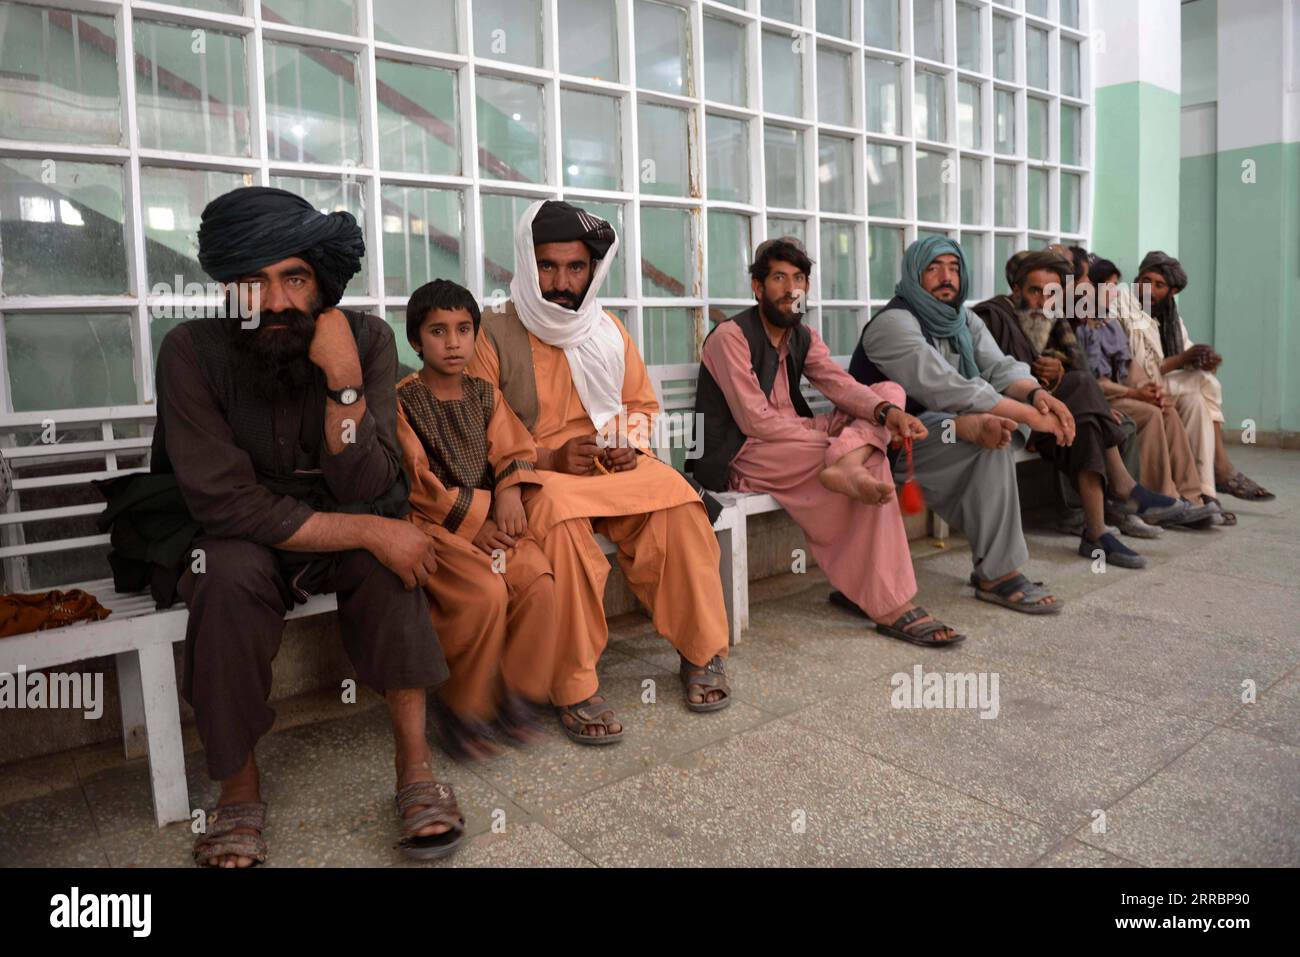 211002 -- KANDAHAR, Oct. 2, 2021 -- Relatives of patients wait at the Mirwais Regional Hospital in Kandahar city, southern Afghanistan, Sept. 30, 2021. TO GO WITH Feature: China-built hospital gives patients hope amid Afghanistan s strained health system Photo by /Xinhua AFGHANISTAN-KANDAHAR-CHINA-BUILT HOSPITAL SanaullahxSeiam PUBLICATIONxNOTxINxCHN Stock Photo